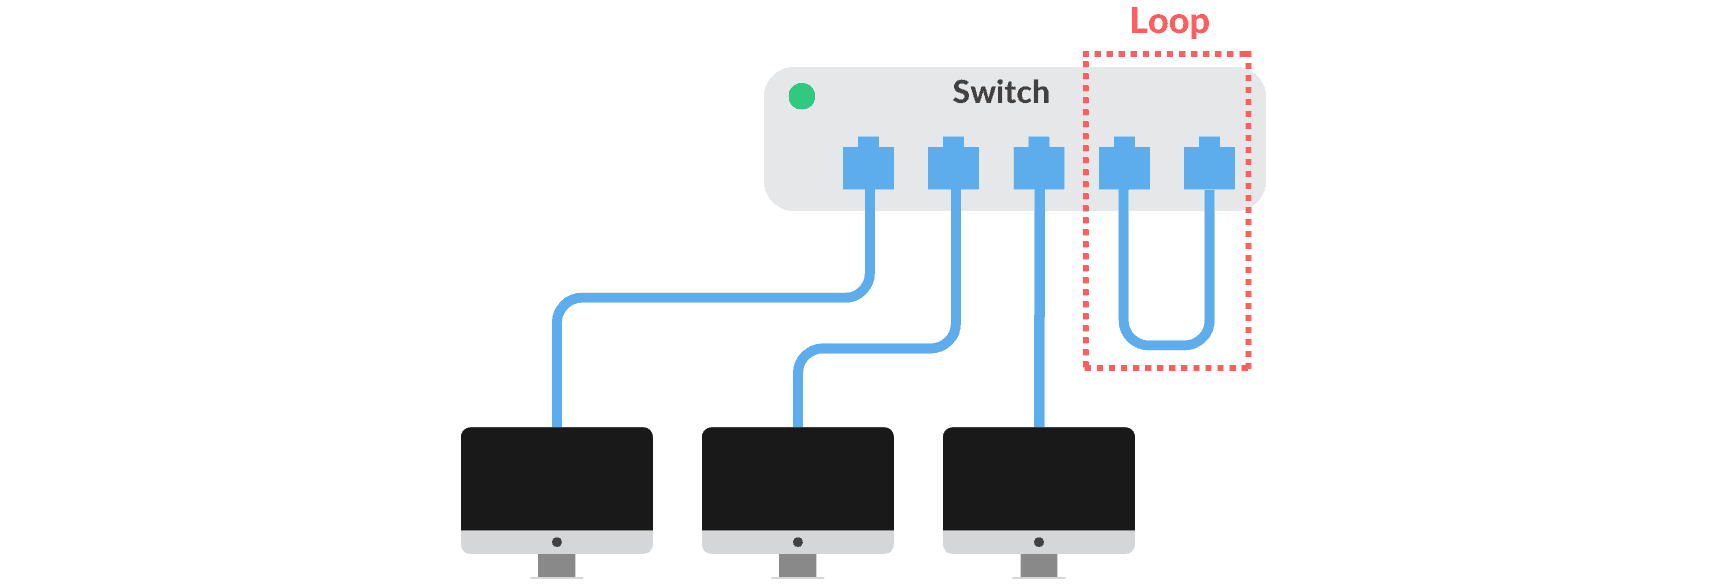 Network loop 1 switch